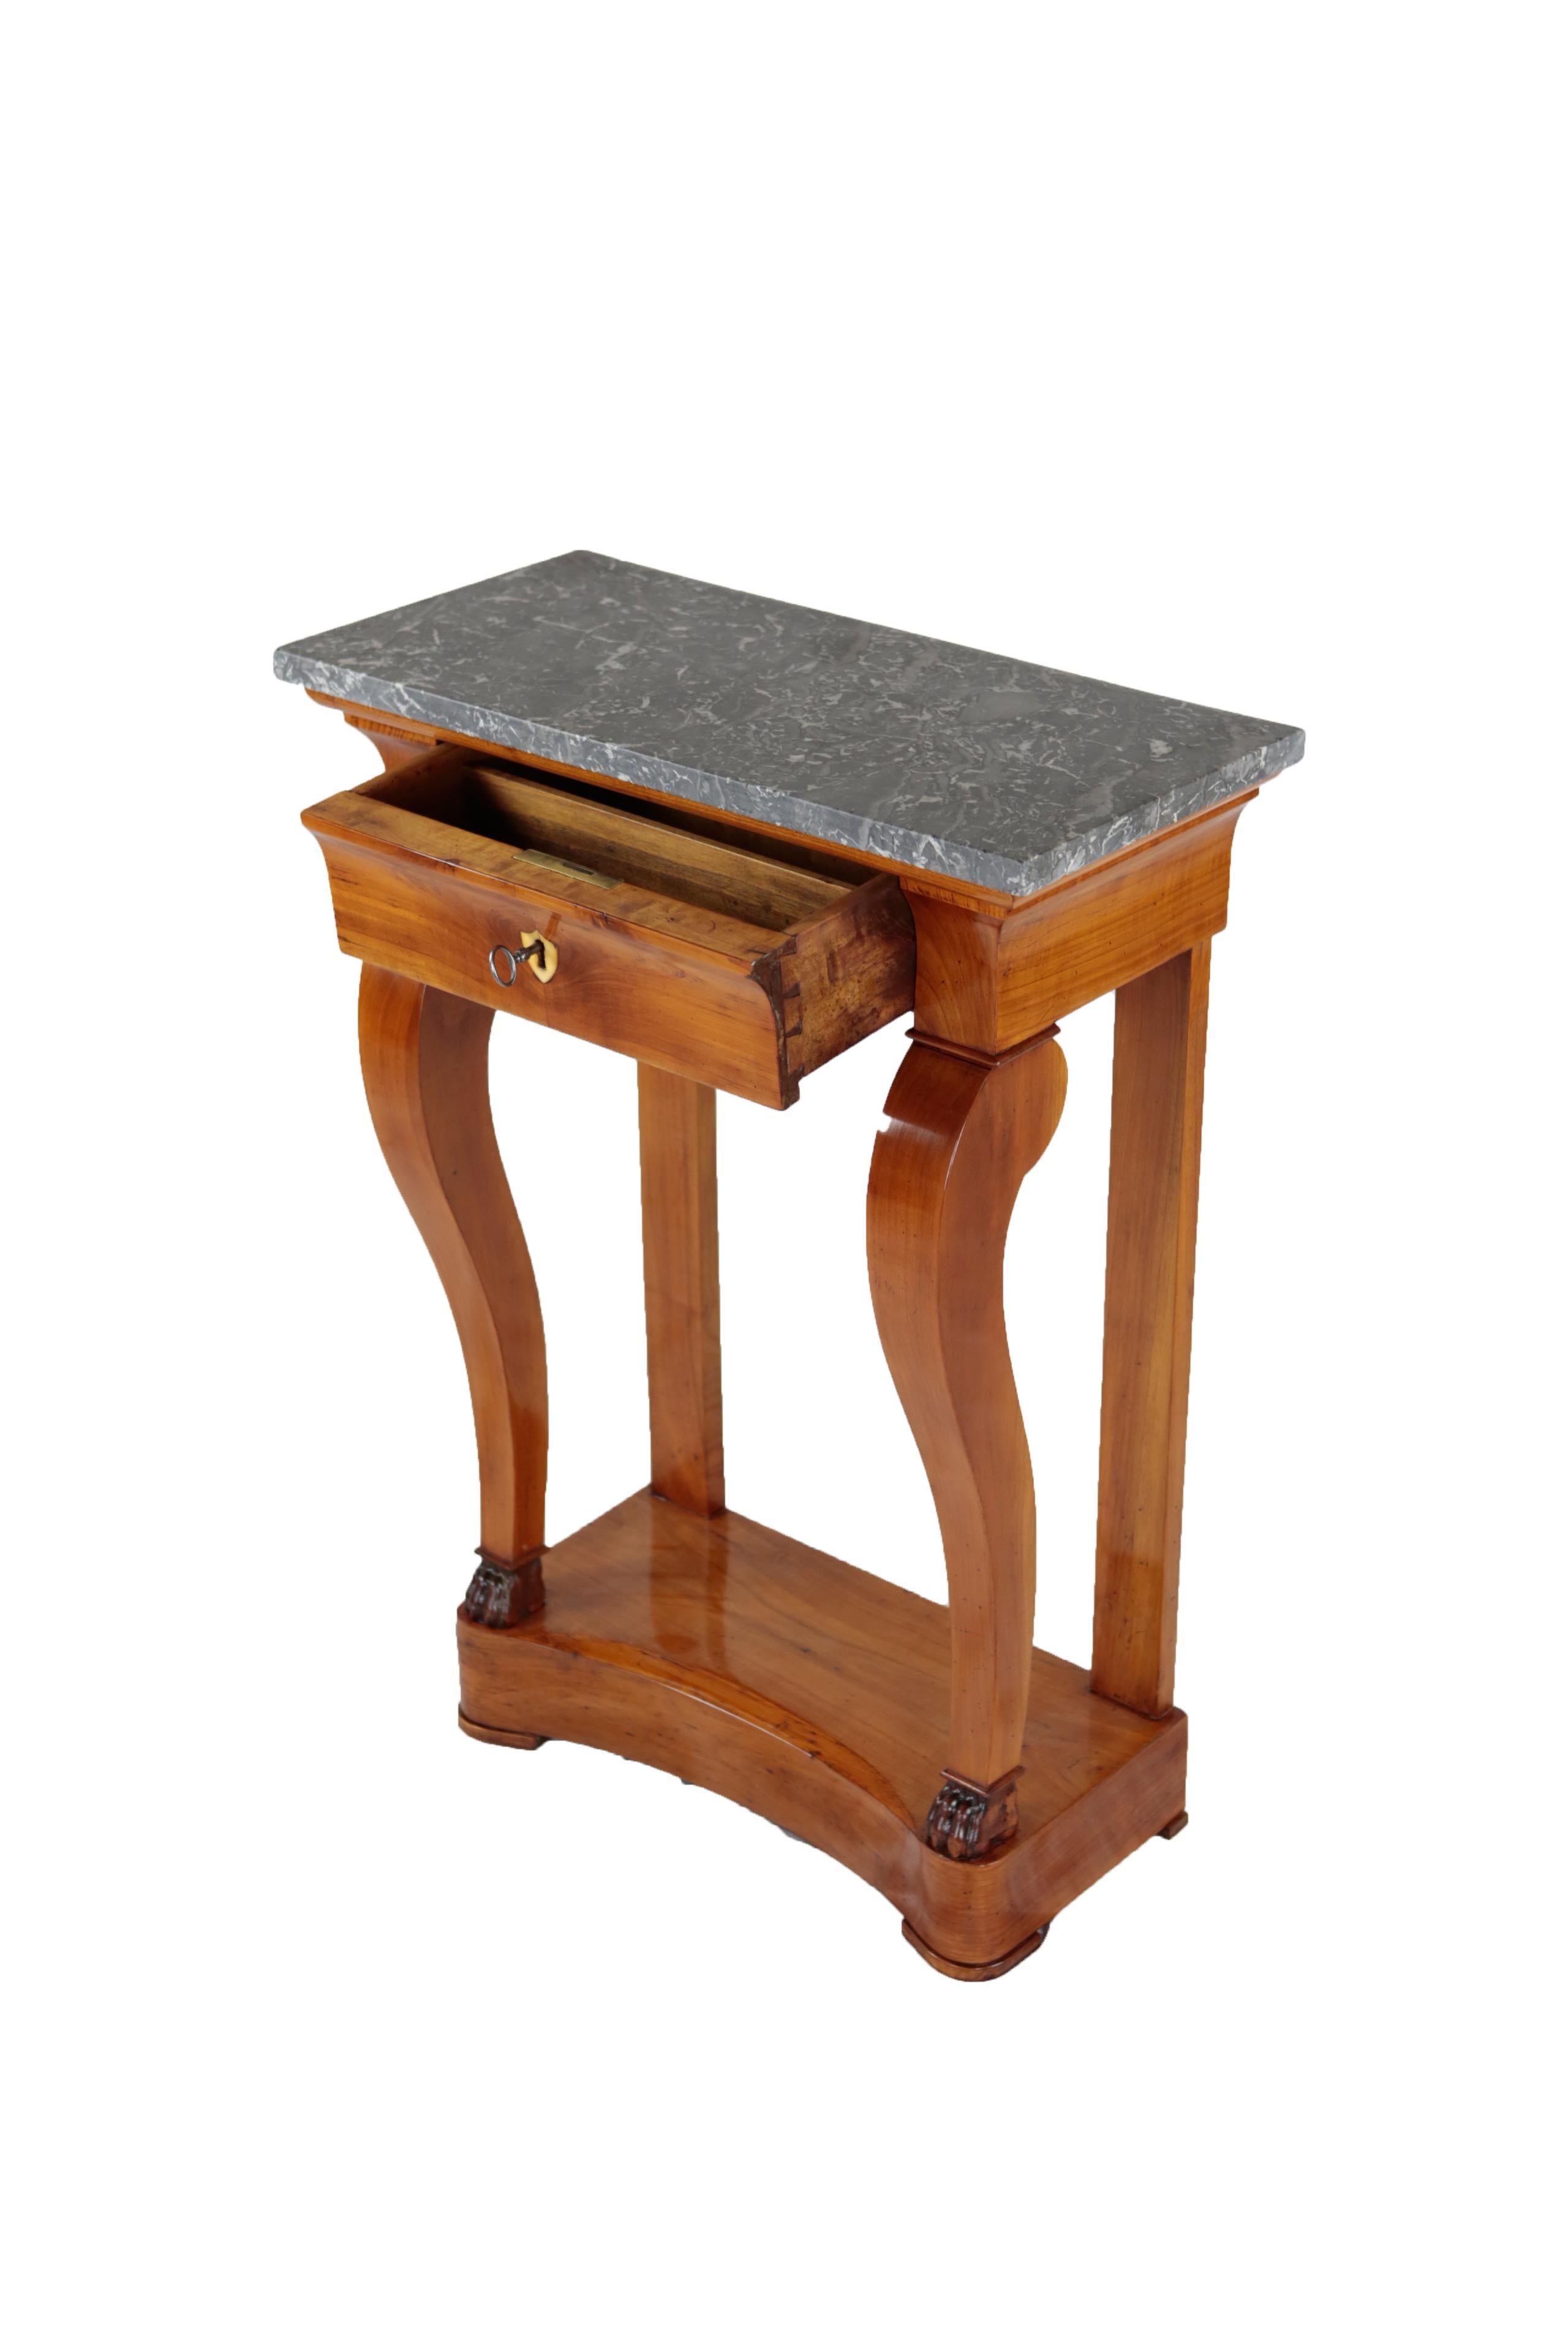 19th Century Biedermeier Period Console Table with Marble Top, Cherrywood Veneer For Sale 1